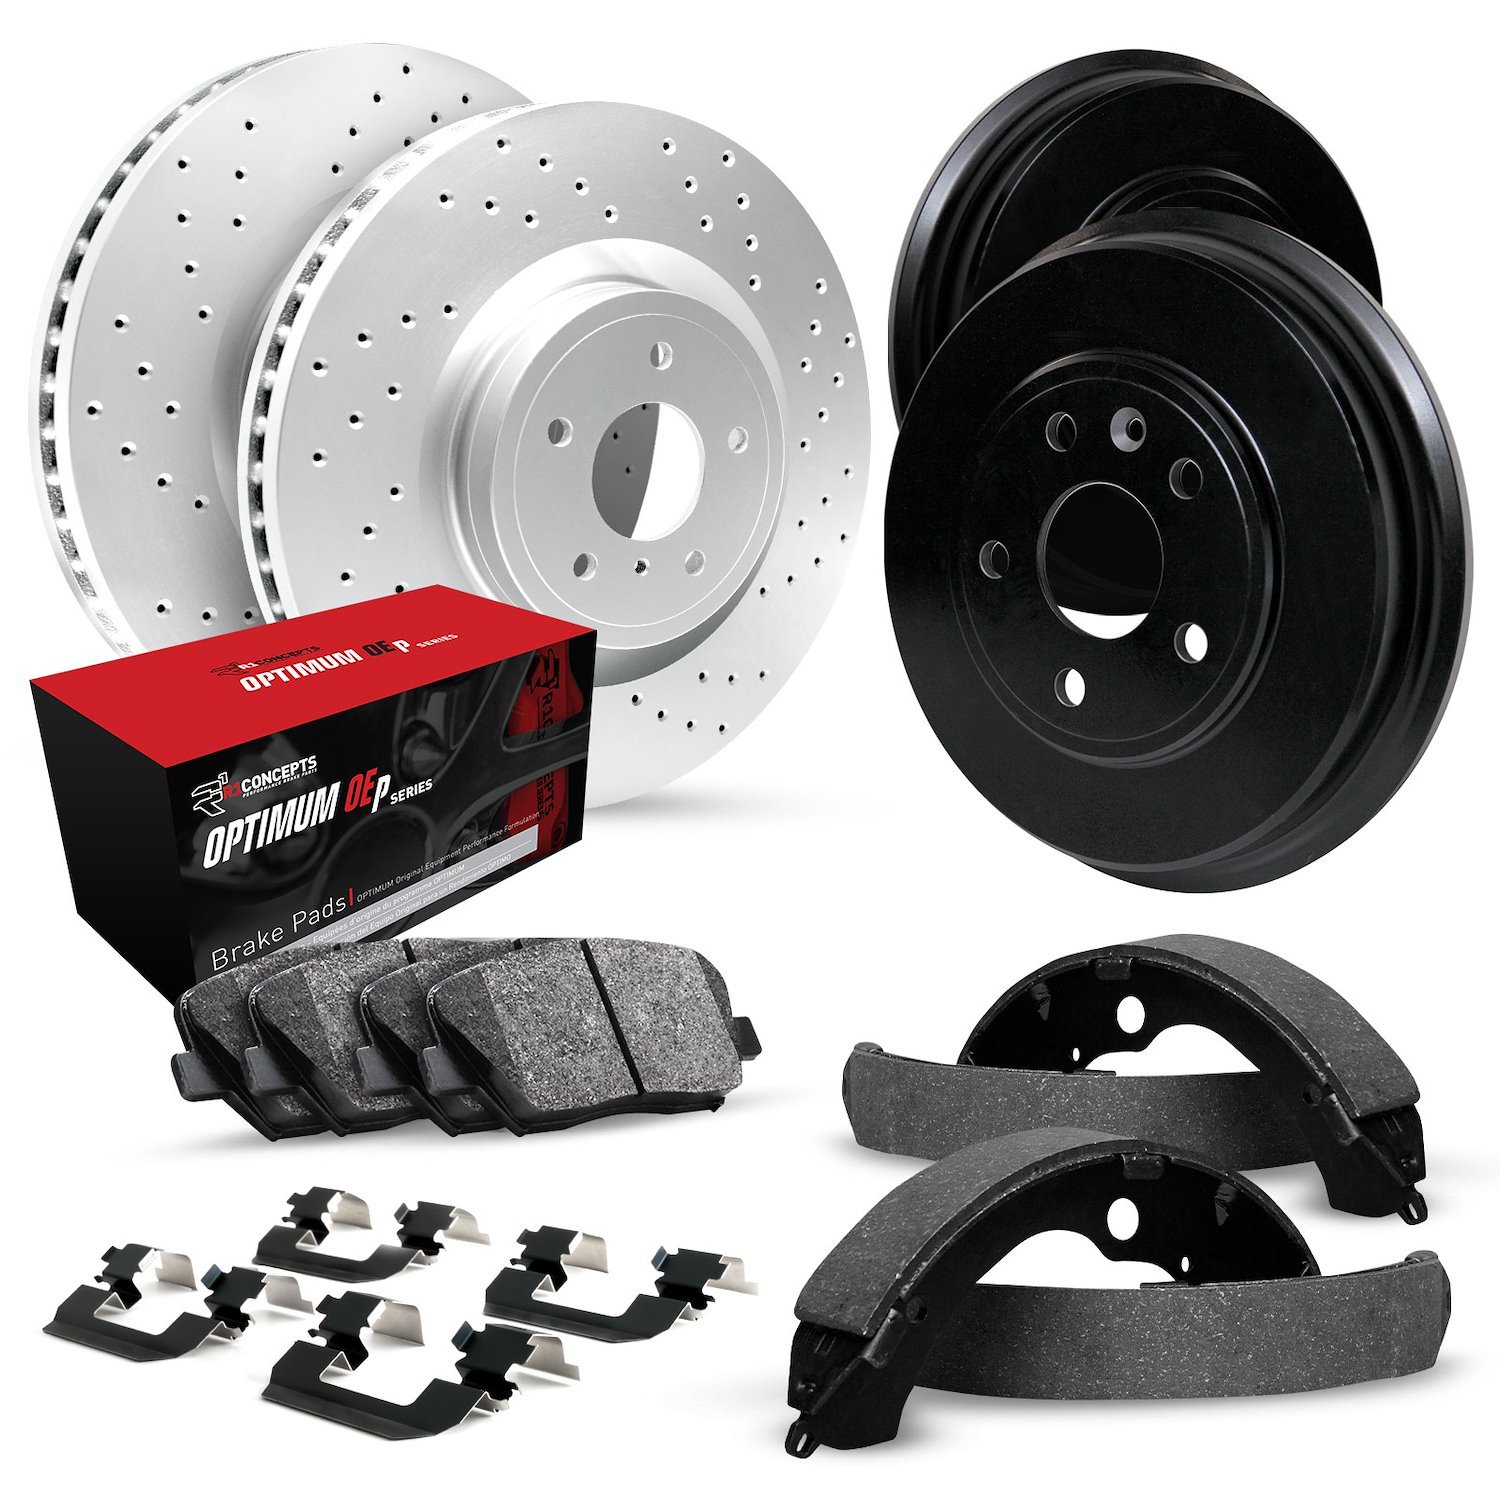 GEO-Carbon Drilled Brake Rotor & Drum Set w/Optimum OE Pads, Shoes, & Hardware, 1982-1982 GM, Position: Front & Rear